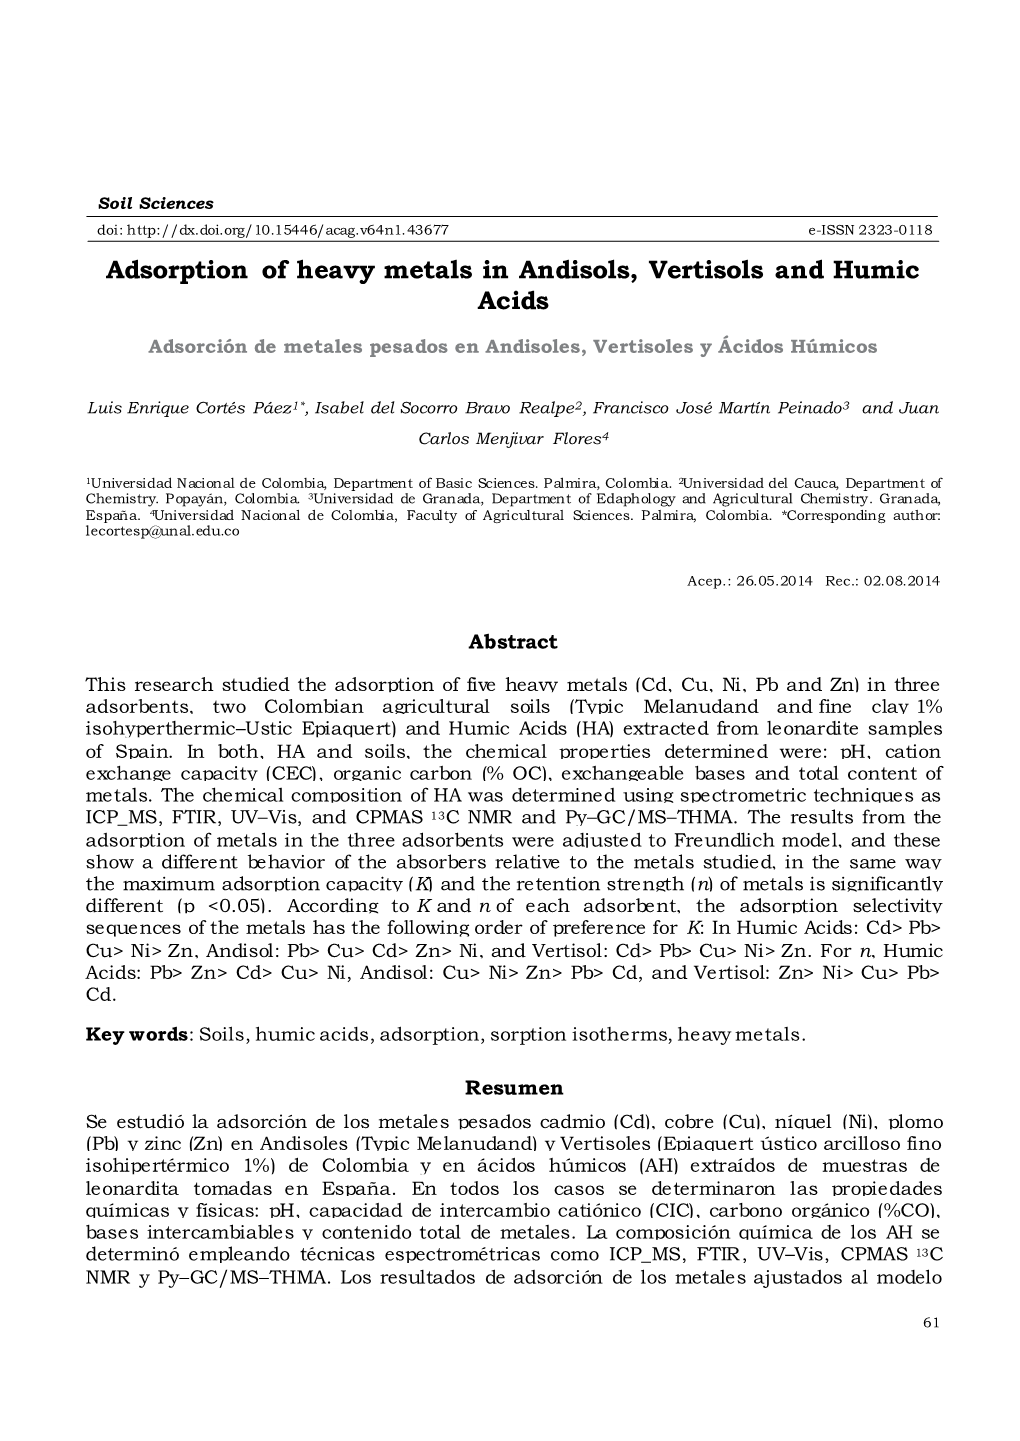 Adsorption of Heavy Metals in Andisols, Vertisols and Humic Acids